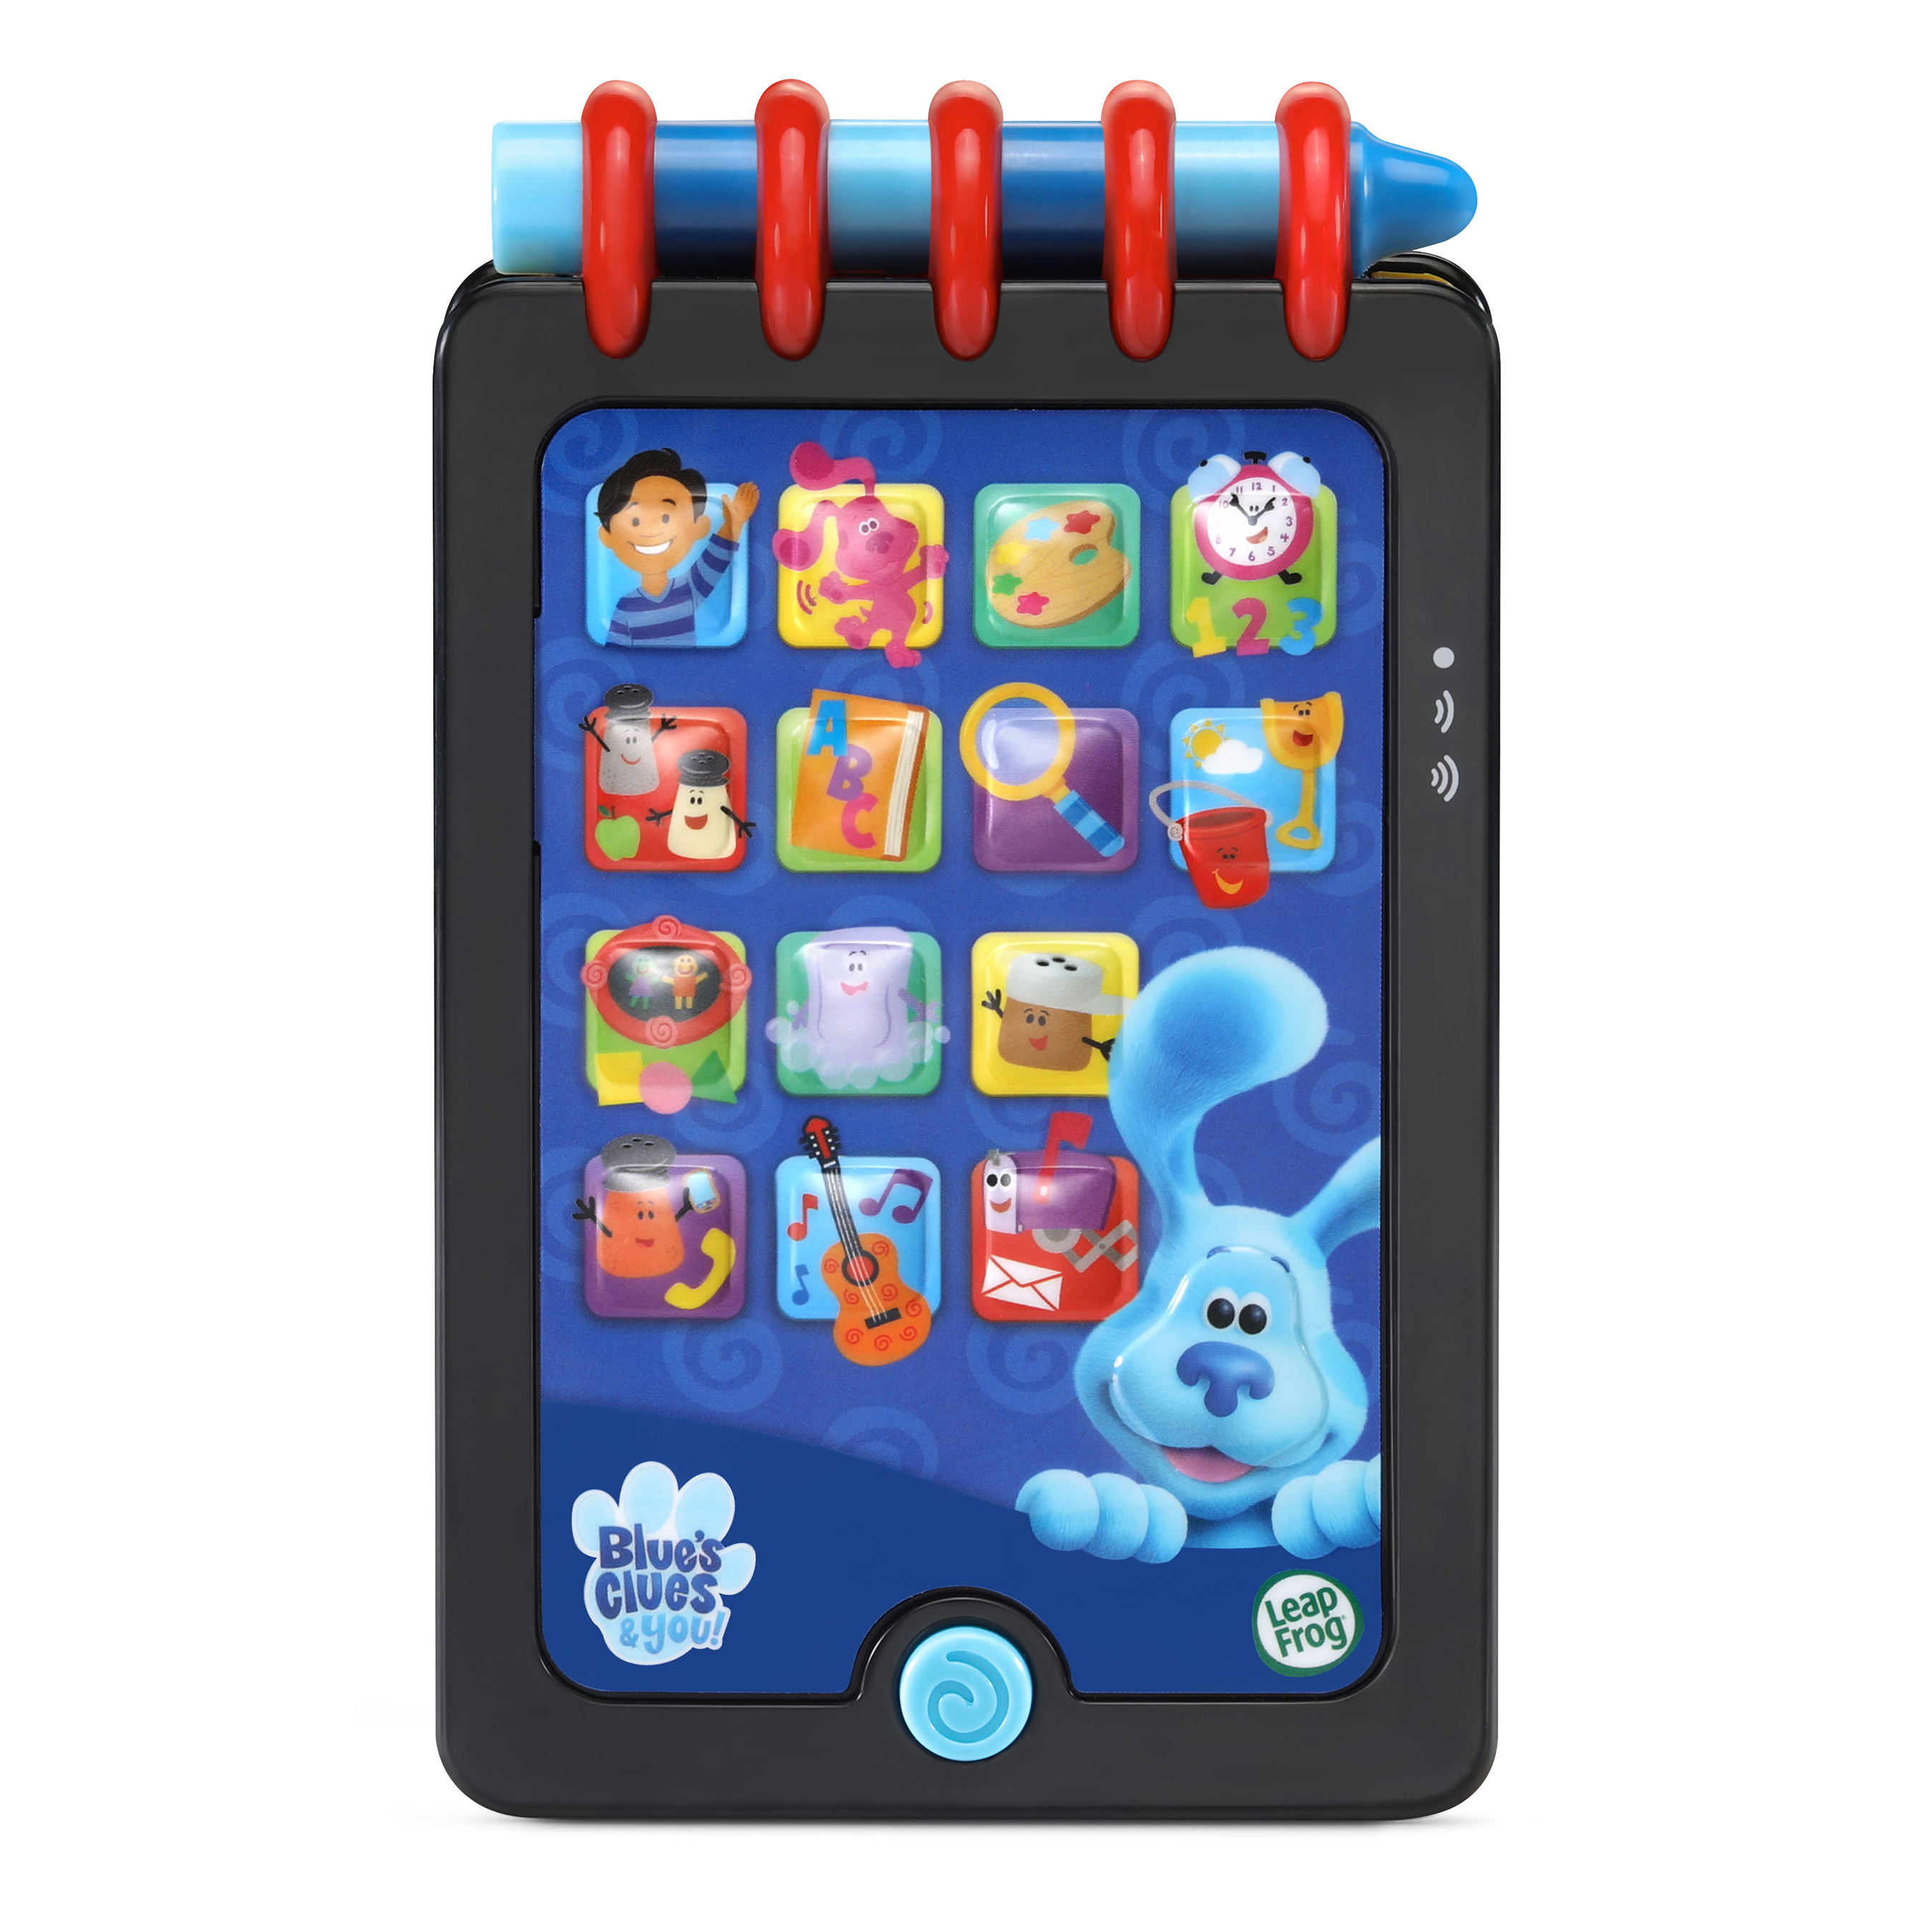 New Blue's Clues & You! Really Smart Handy Dandy Notebook from LeapFrog is available now.